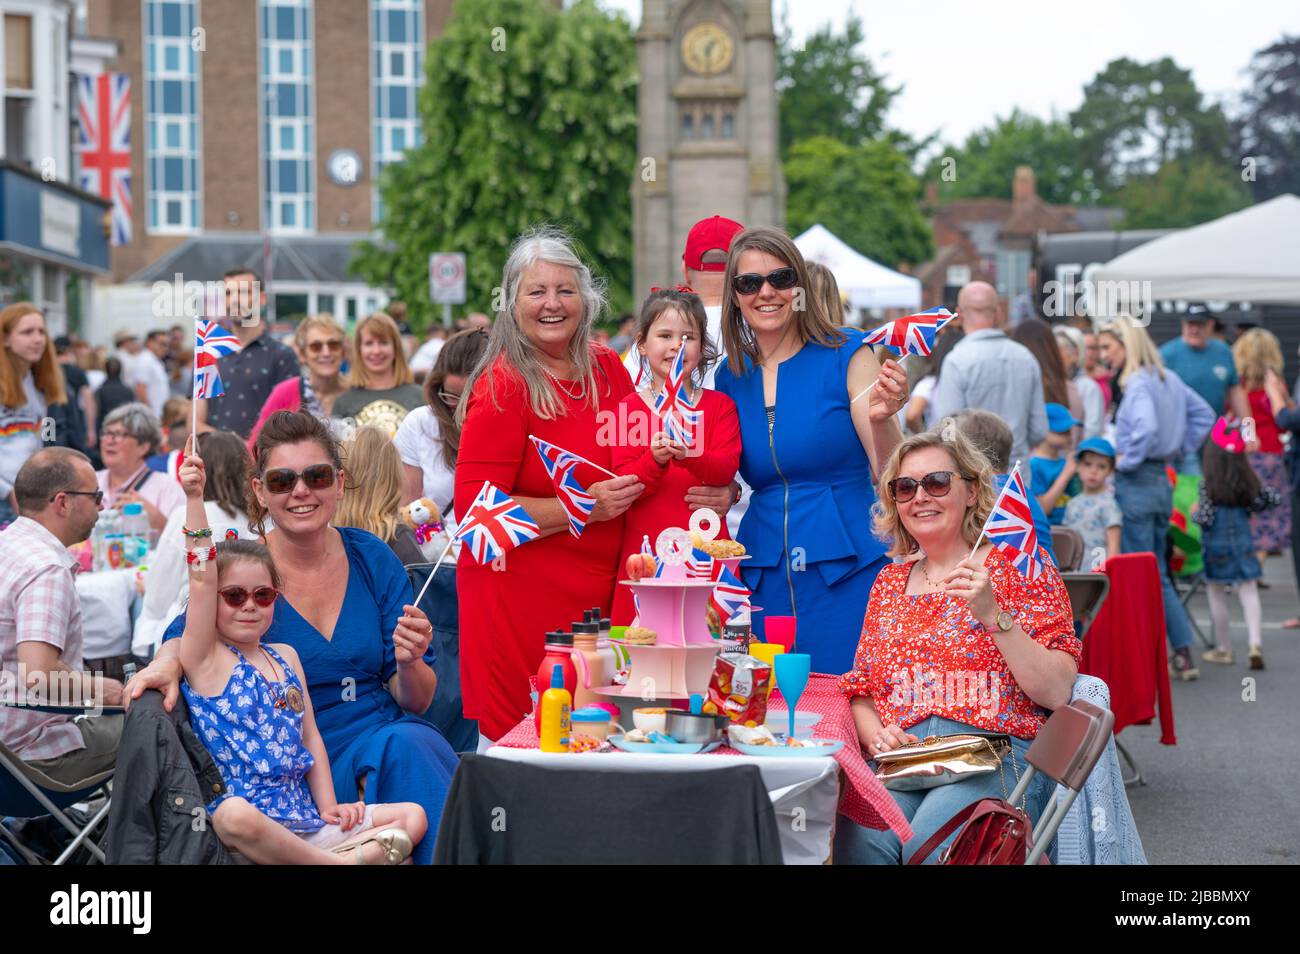 Platinum Jubilee celebrations in Kenilworth, Warwickshire. Thousands of locals enjoyed the main road closure, to sit on picnic tables and celebrate the Queen's 70th anniversary of her reign. Stock Photo